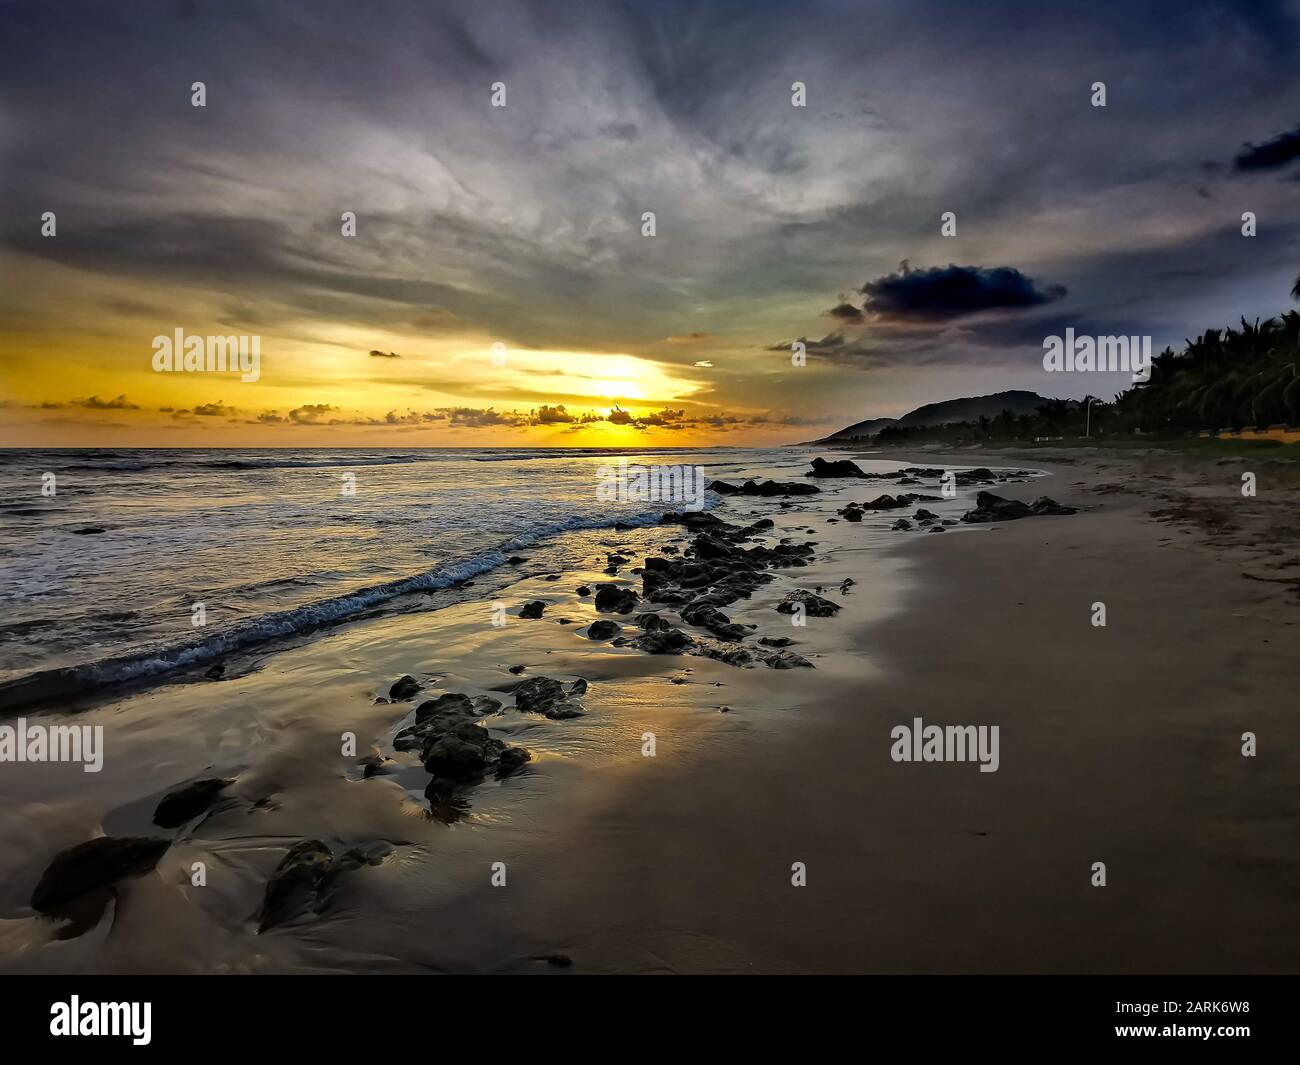 The sun contrasting with the sky, clouds, water, rocks and sand on the Stock Photo